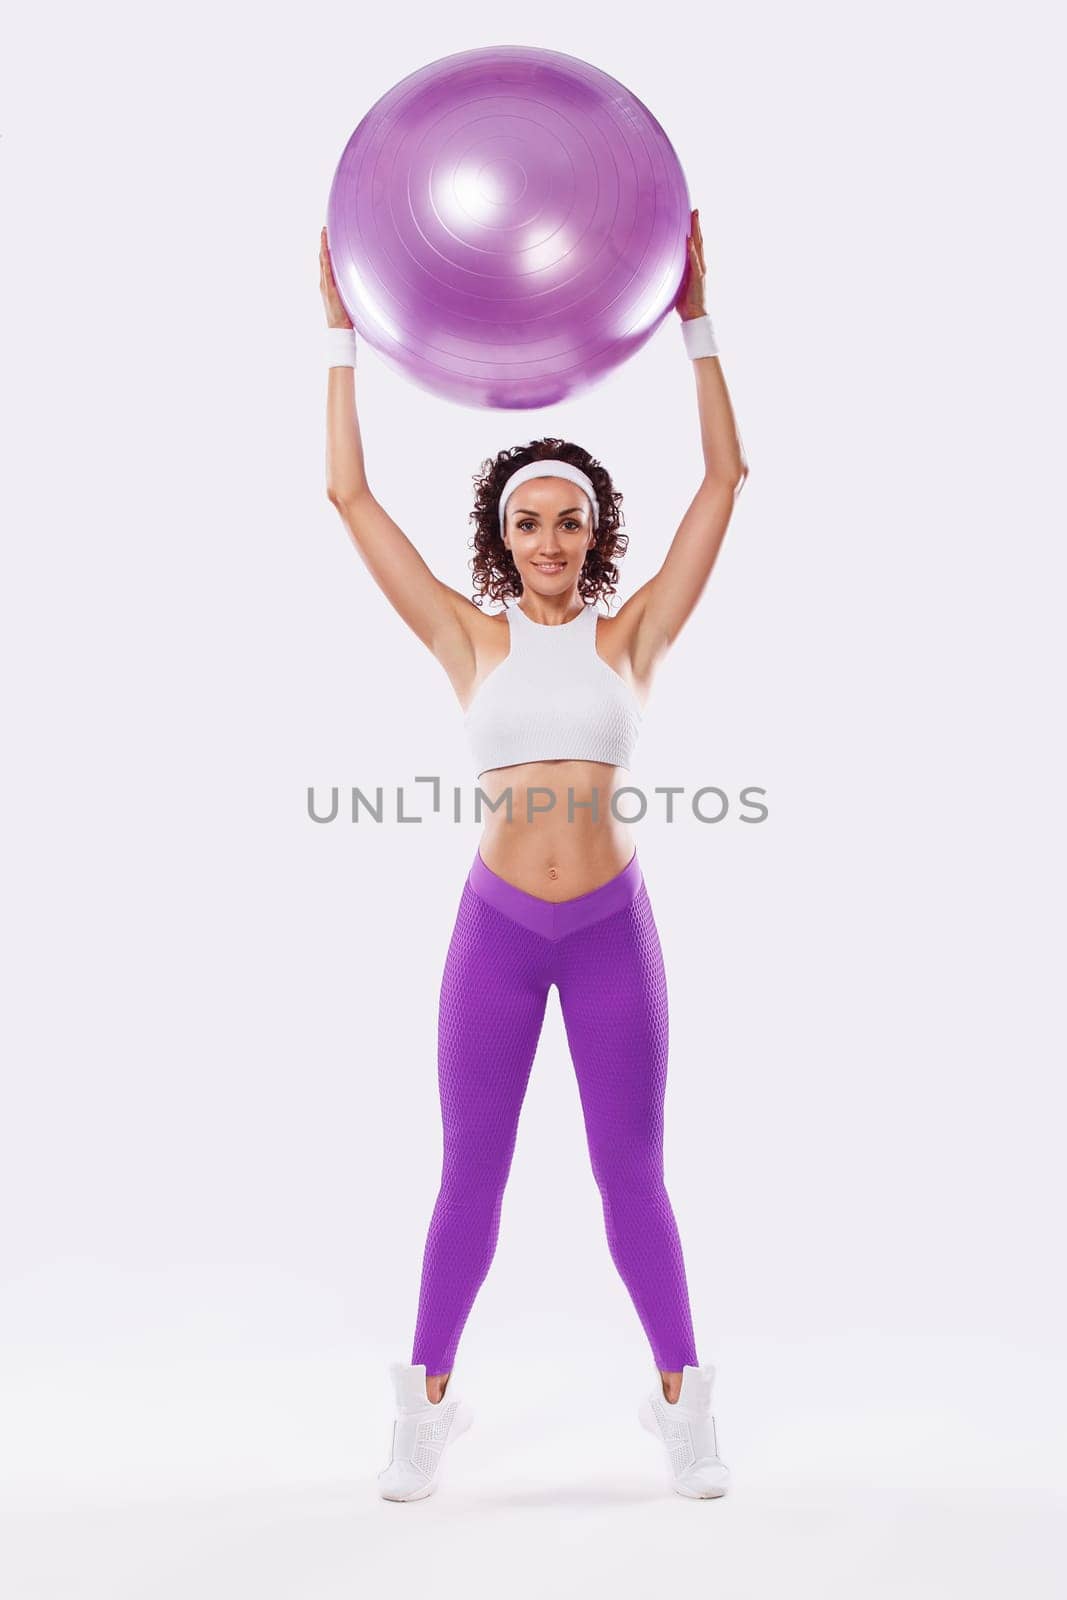 Young sport woman with pink fitball on white background